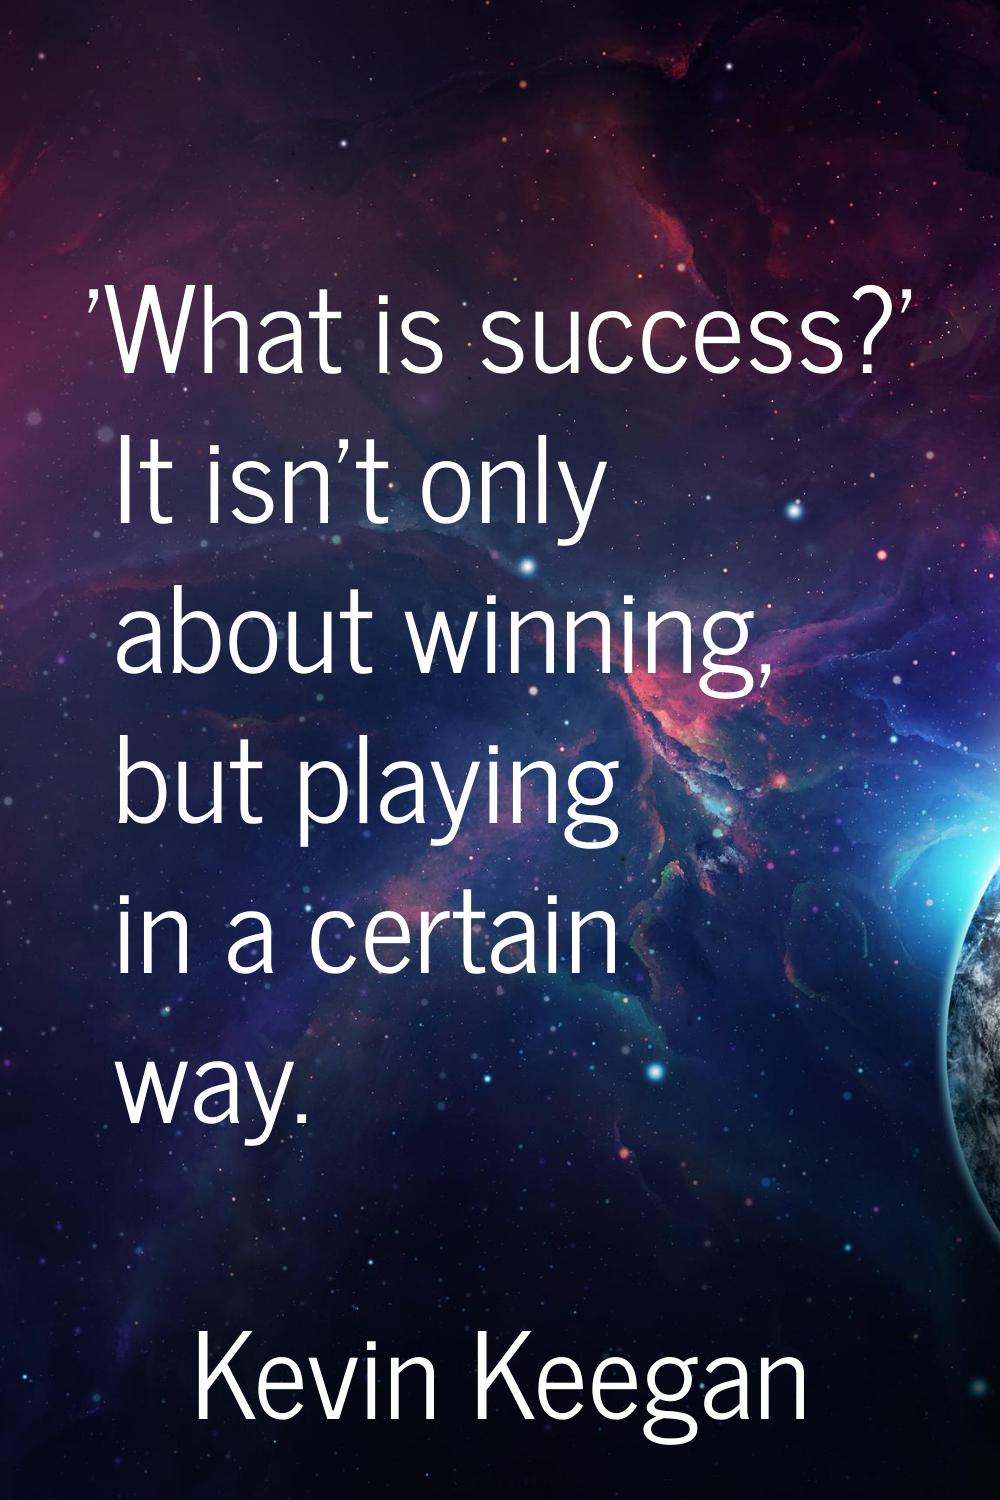 'What is success?' It isn't only about winning, but playing in a certain way.